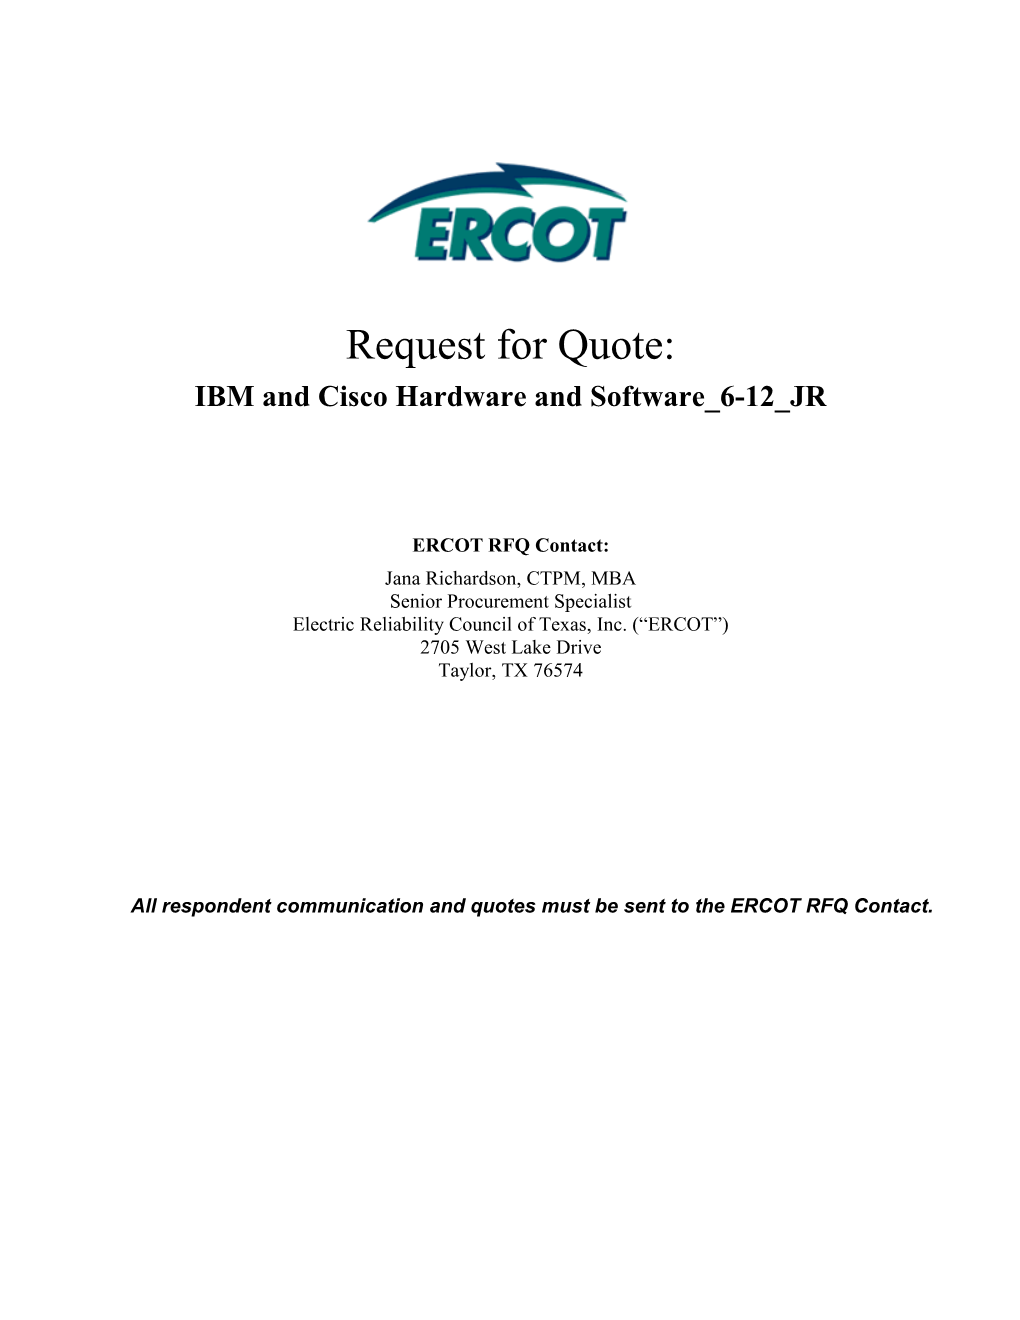 IBM and Cisco Hardware and Software 6-12 JR